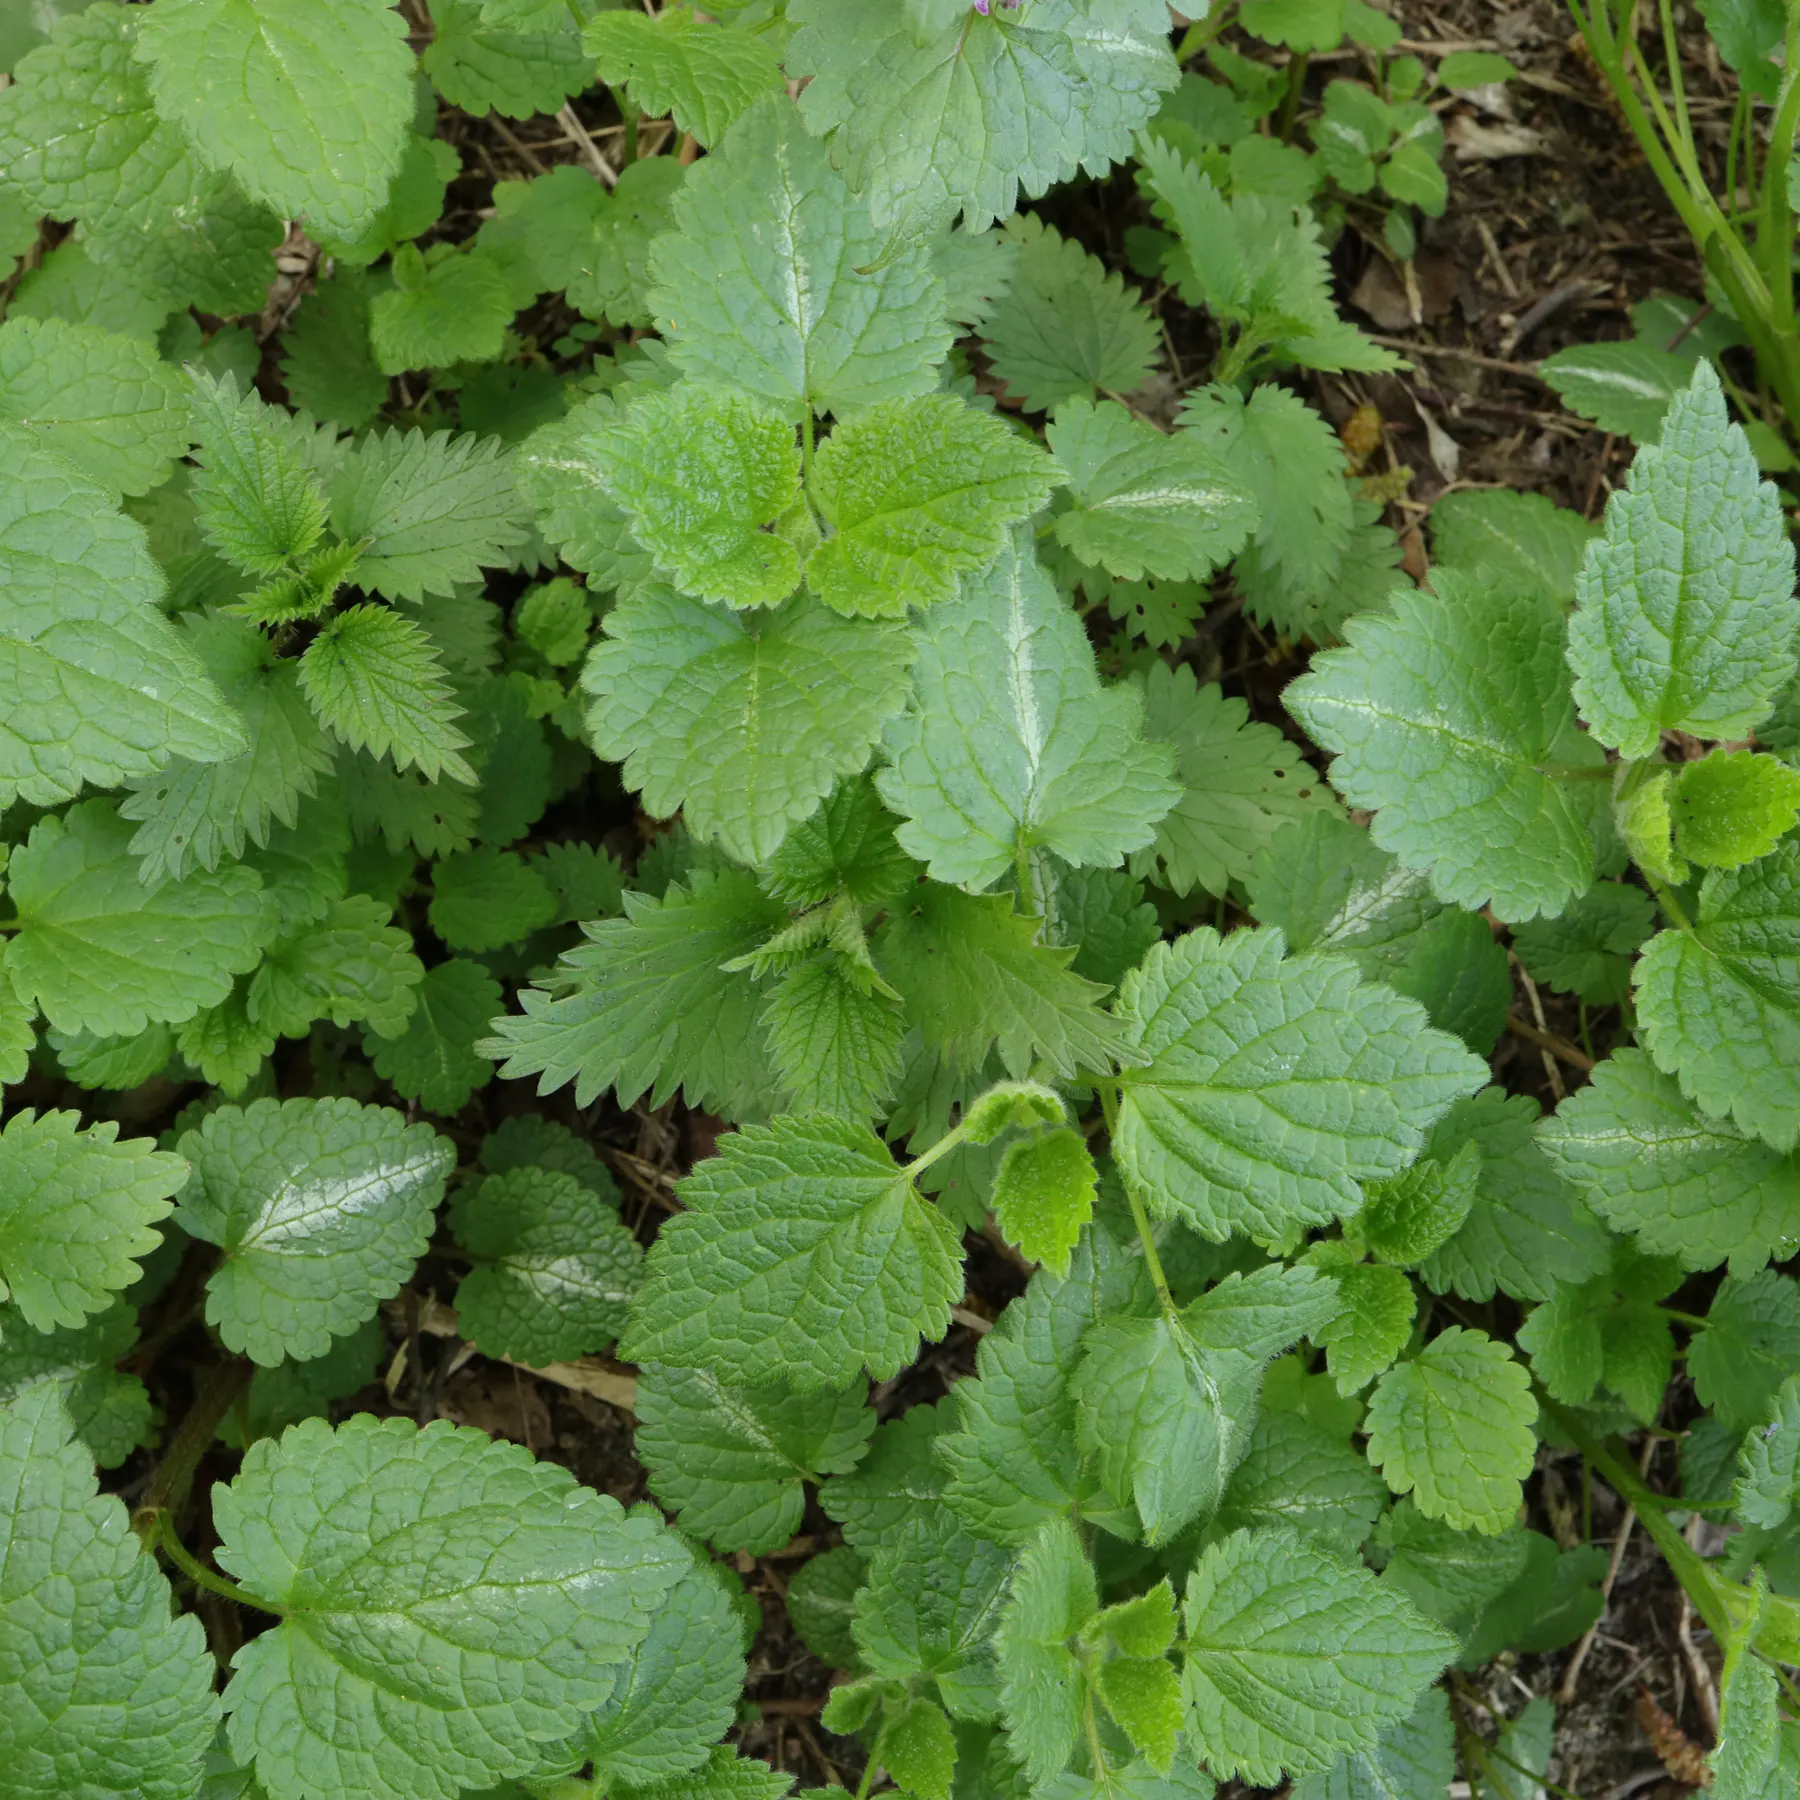 Spotted dead nettle with striped leaves